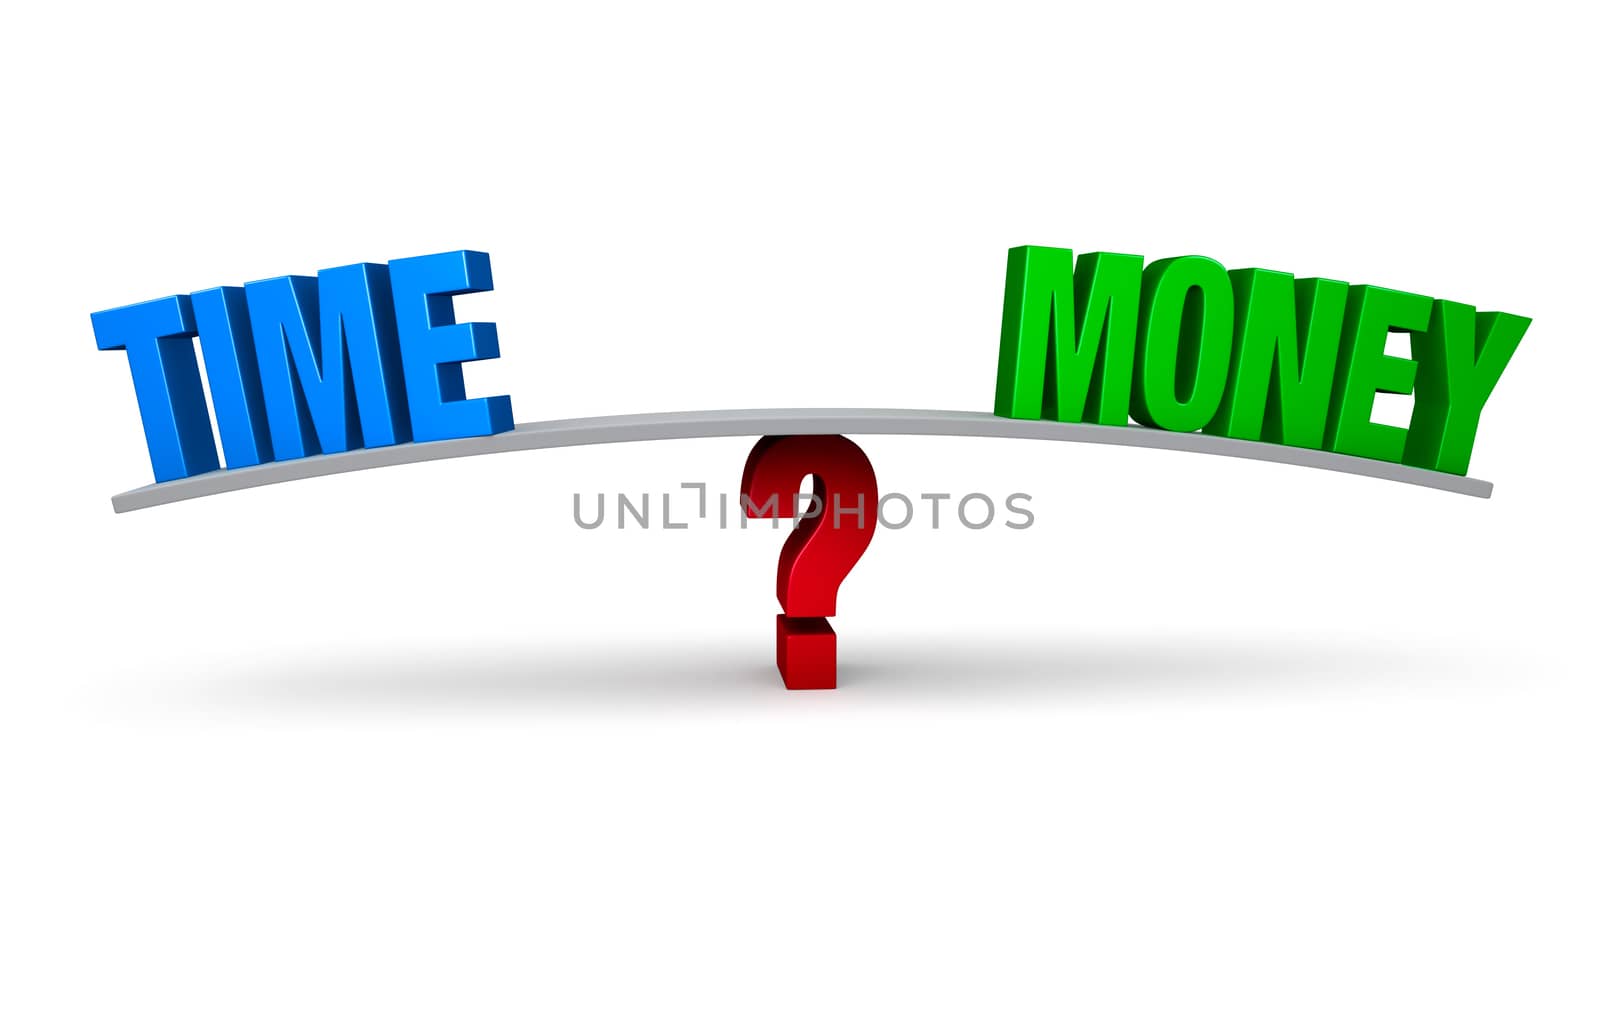 A bright, blue "TIME" and a green "MONEY" sit on opposite ends of a gray board which is balanced on a red question mark. Isolated on white.